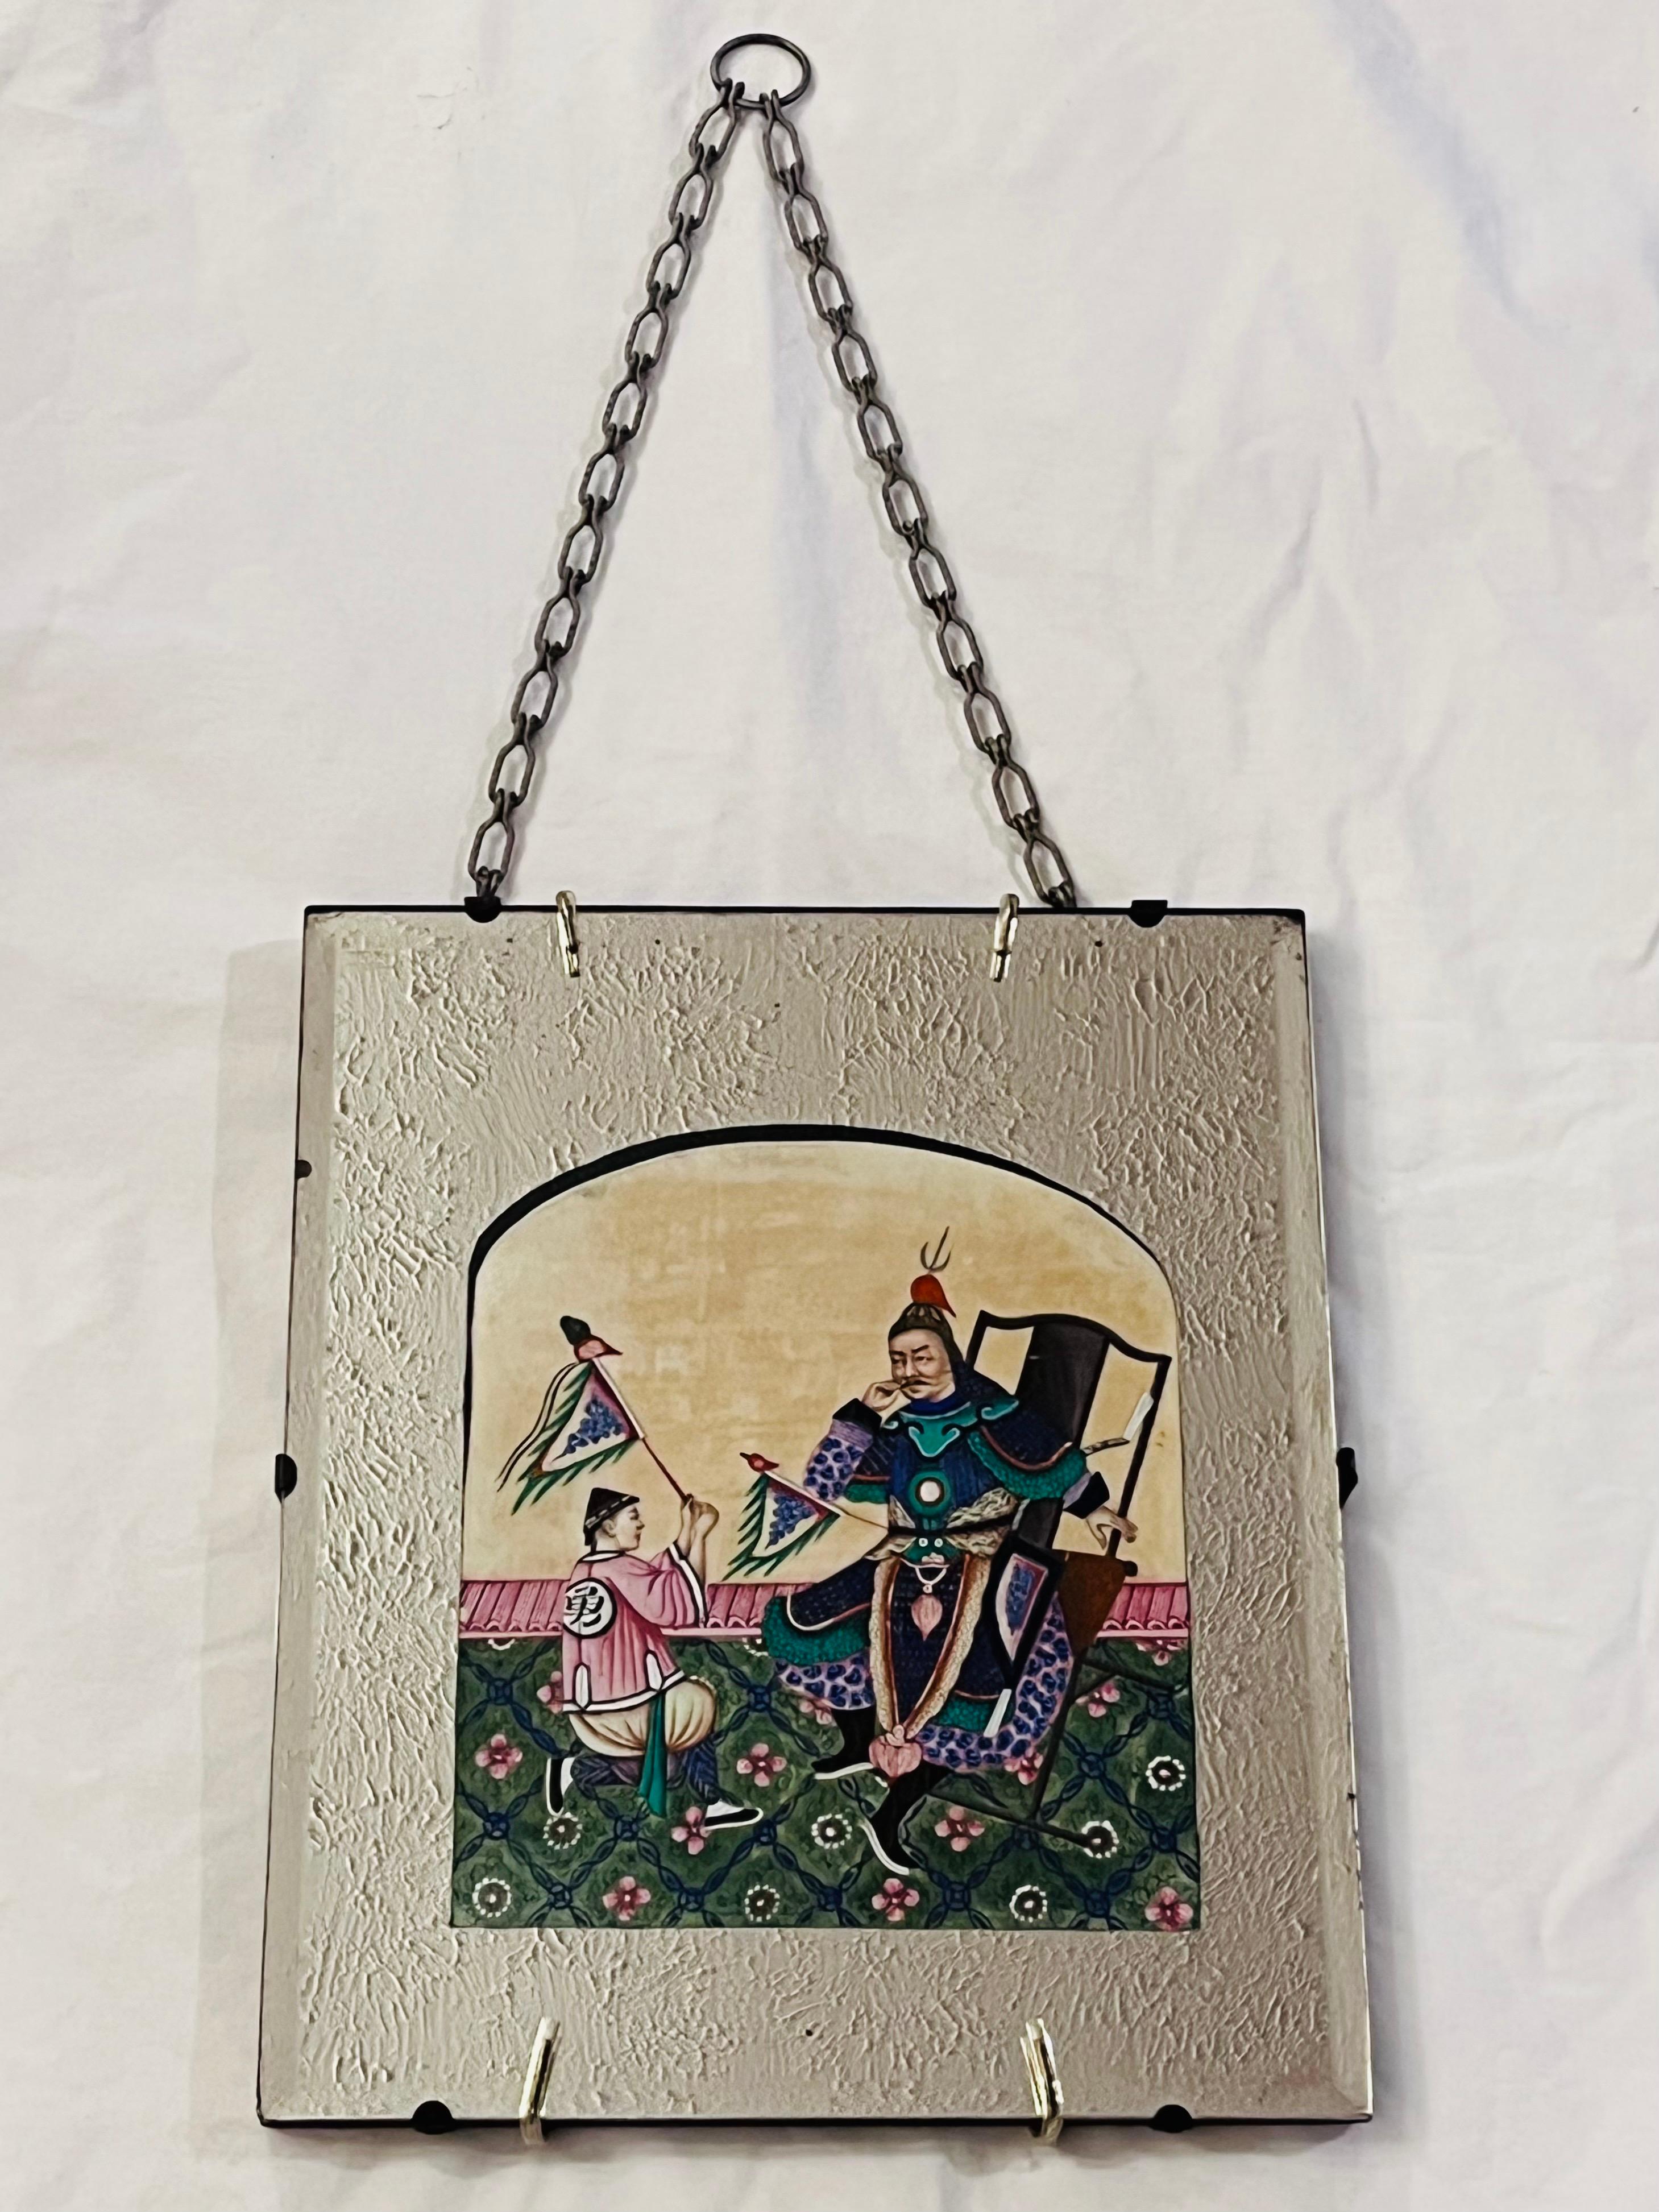 A mid 19th Century circa 1850's Chinese Export rice paper pith painting set within an arched cut out mirror that hangs on the wall from a chain. The painting depicts a Chinese warrior seated in an antique Chinese folding chair of the type generally